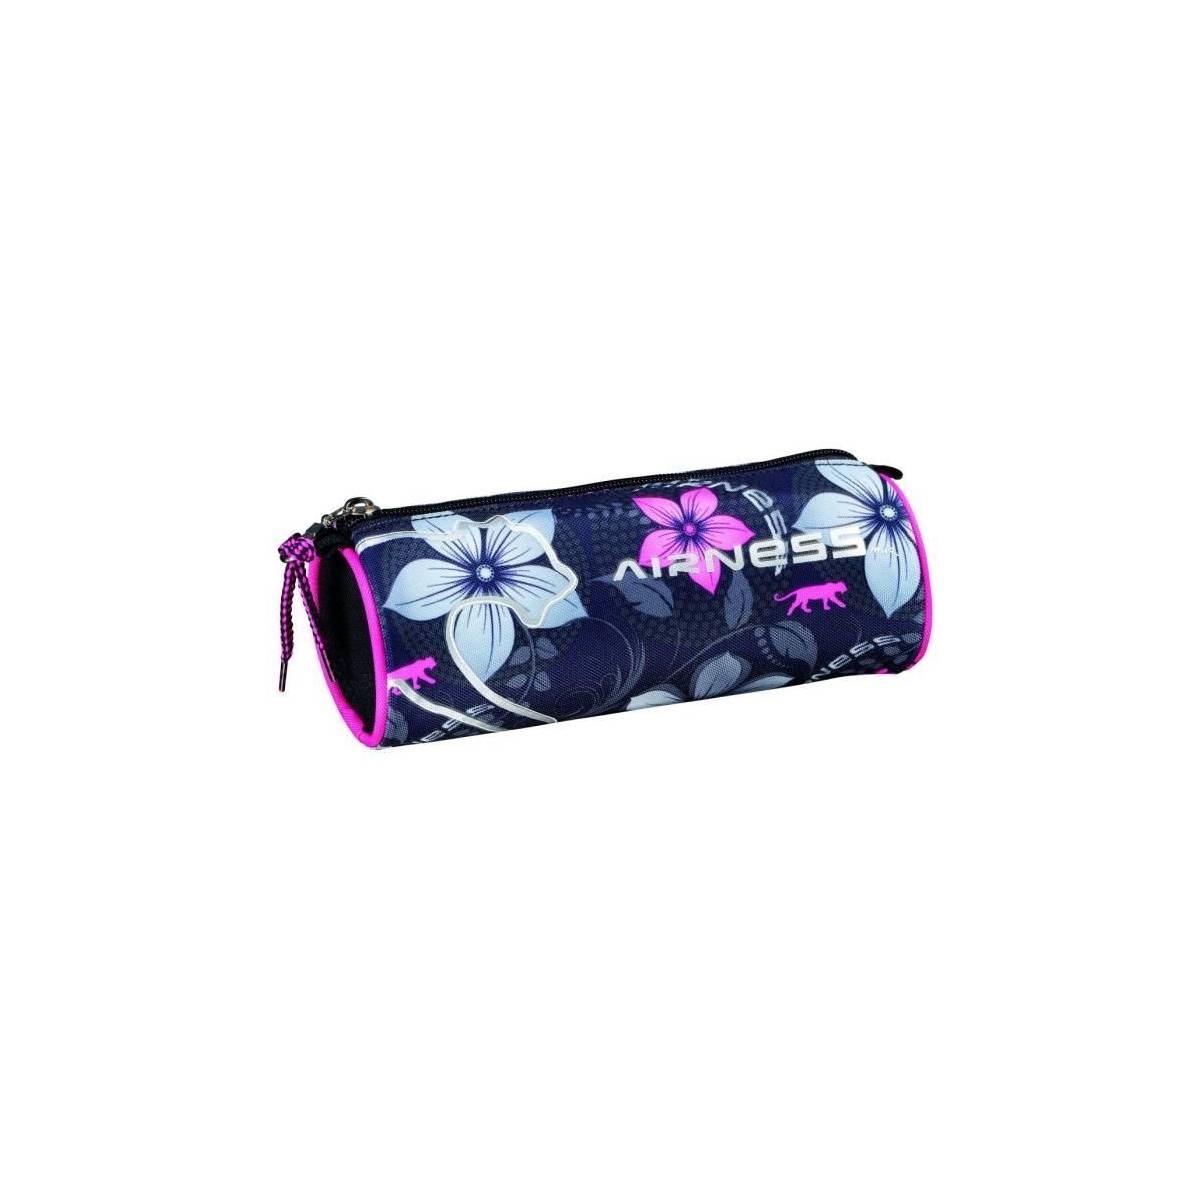 Trousse ronde Airness Girly